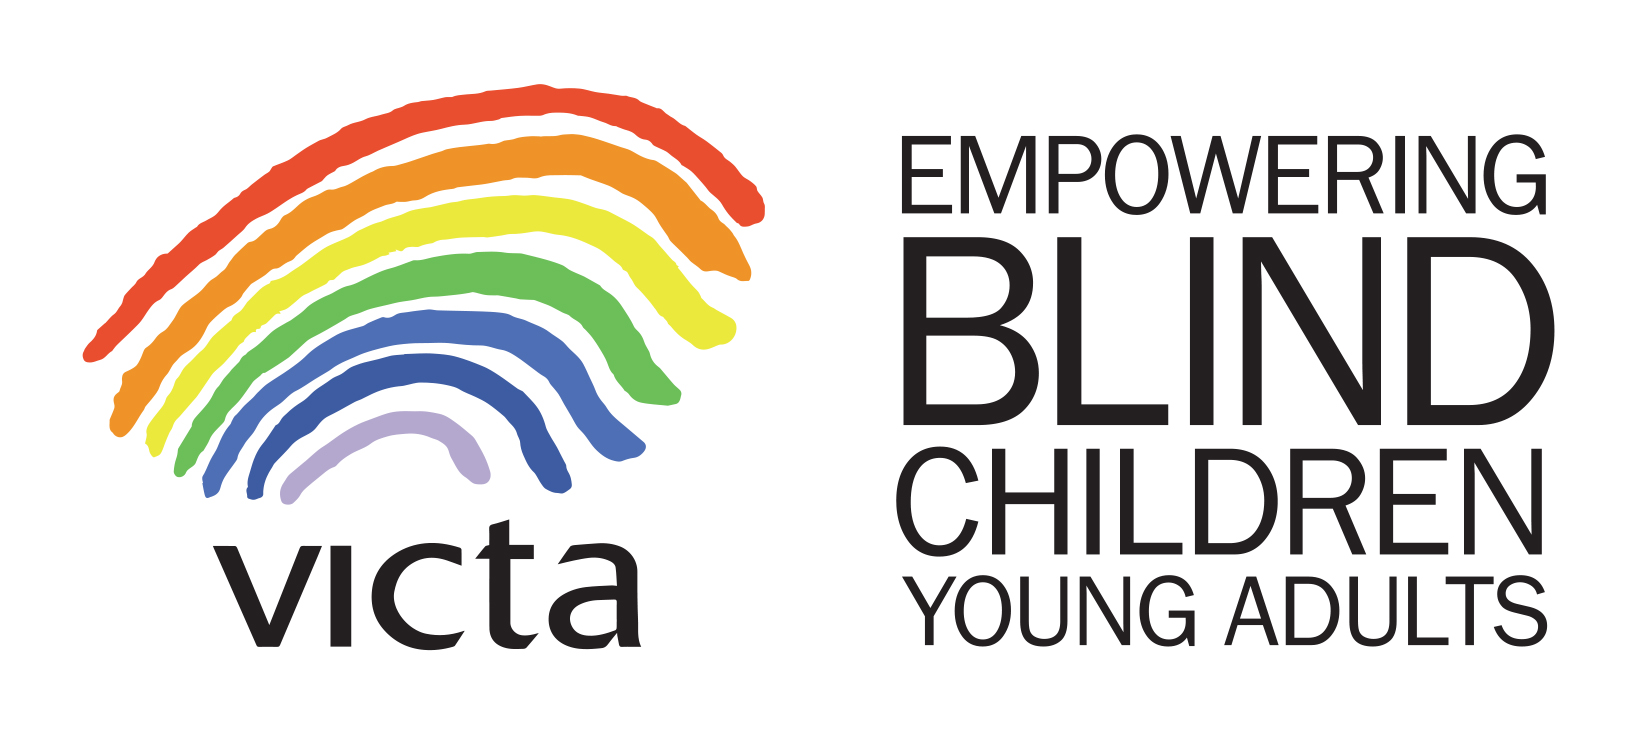 VICTA - Empowering Blind Children and Young Adults. The symbol is a rainbow.